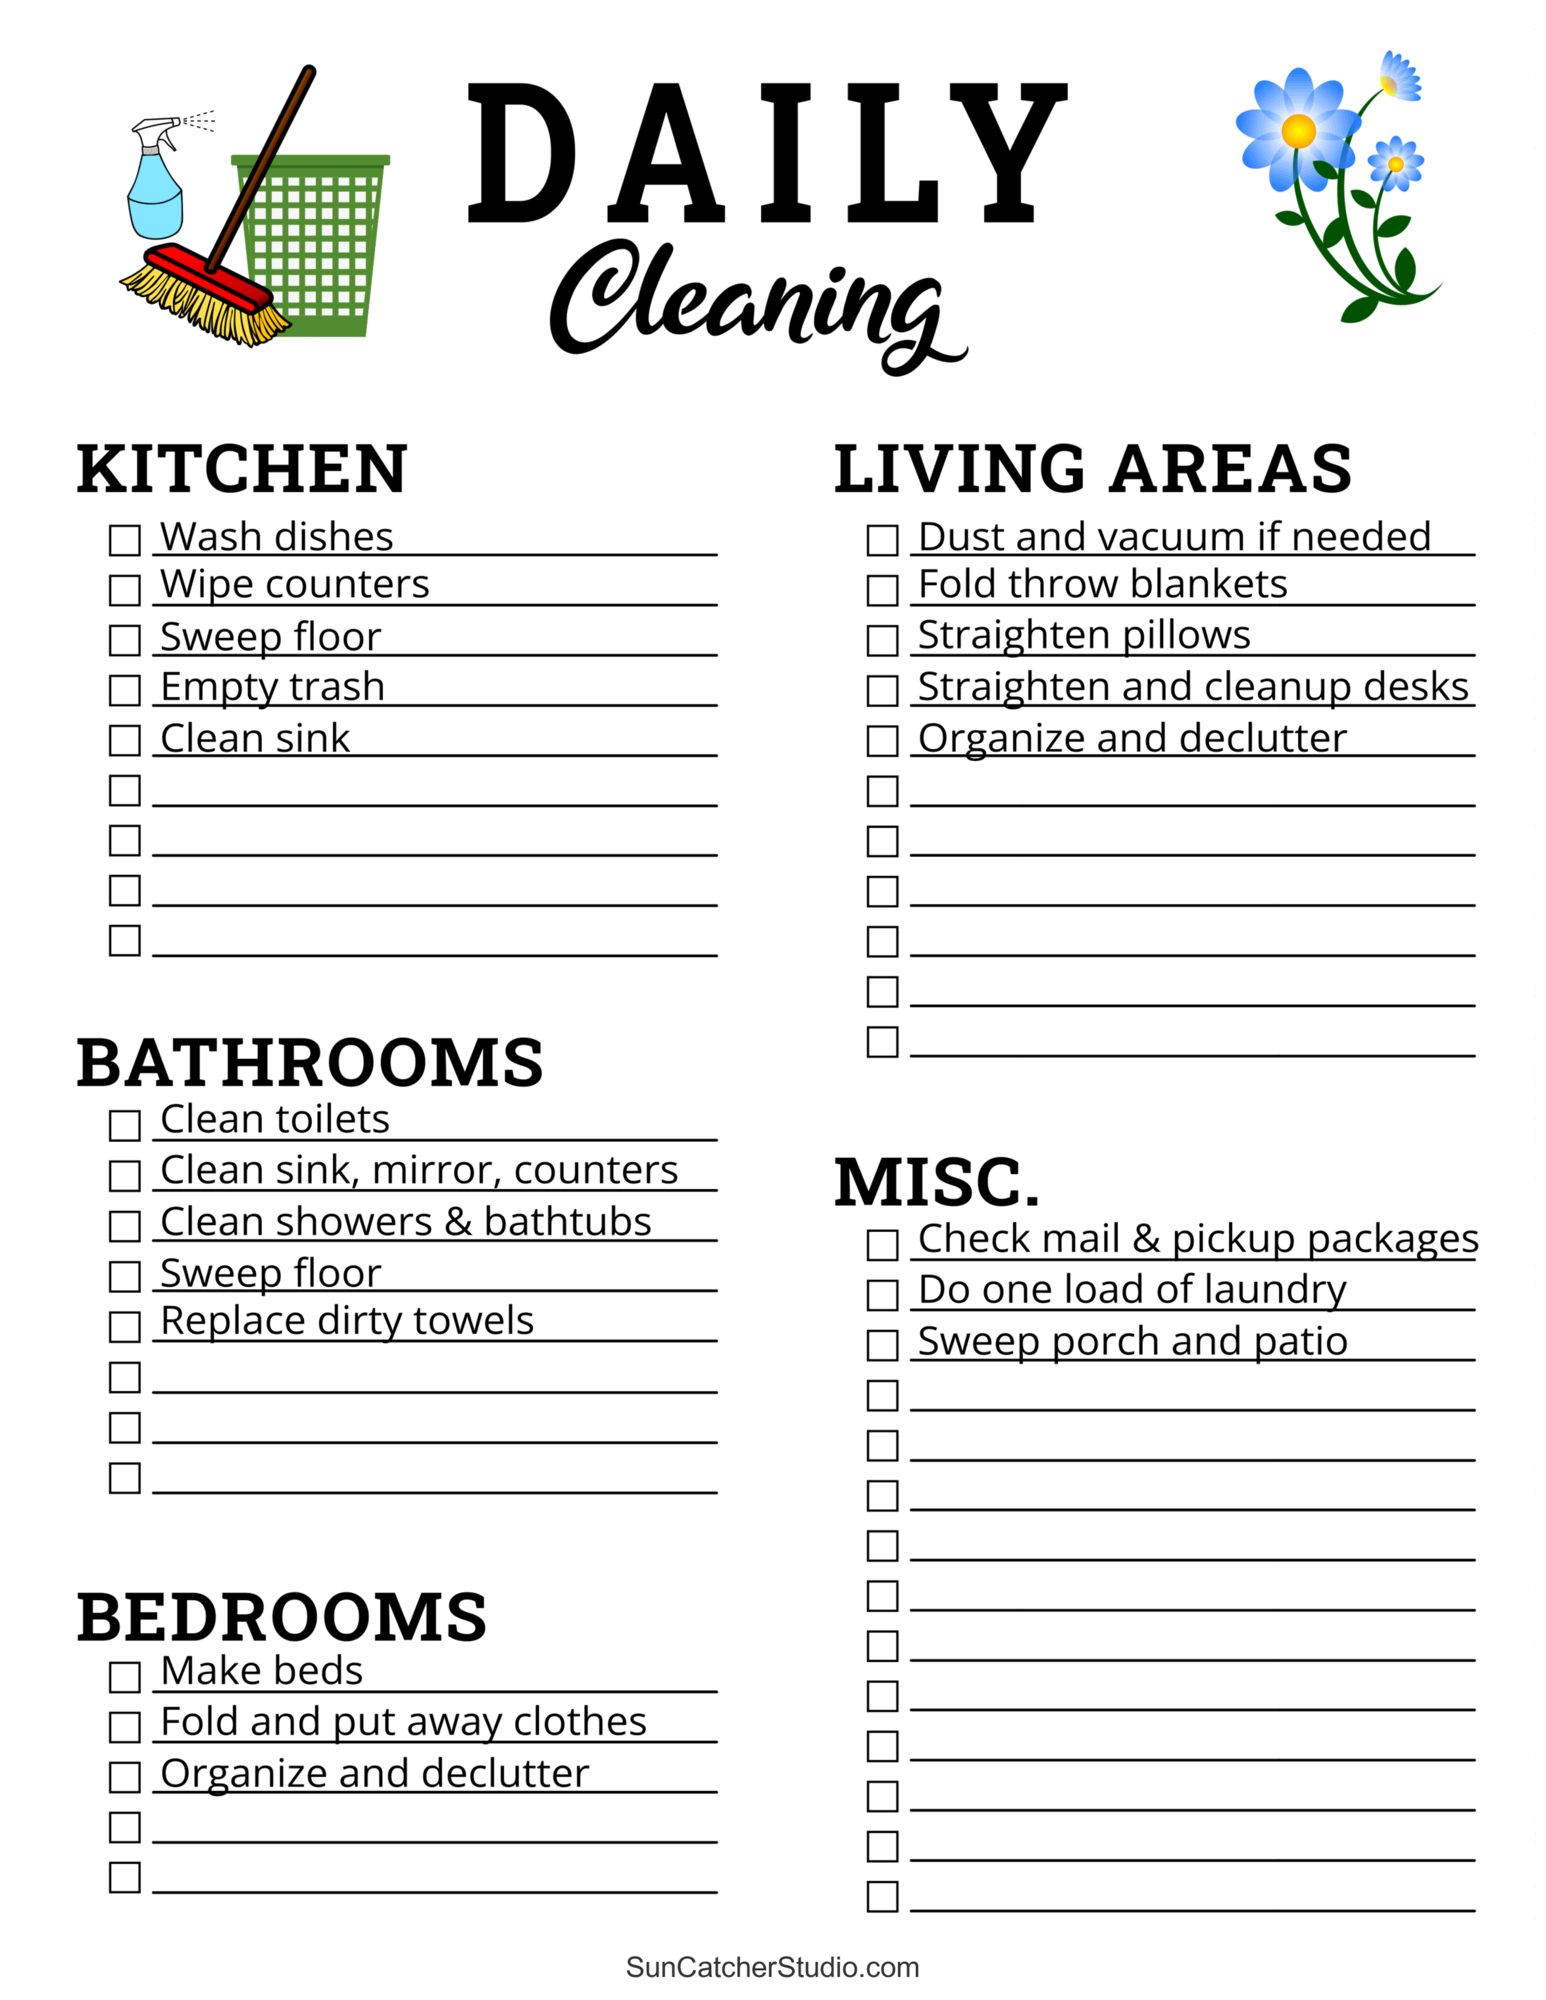 https://suncatcherstudio.com/uploads/printables/cleaning-checklist/pdf-png/daily-cleaning-schedule-010101-fefefe.png